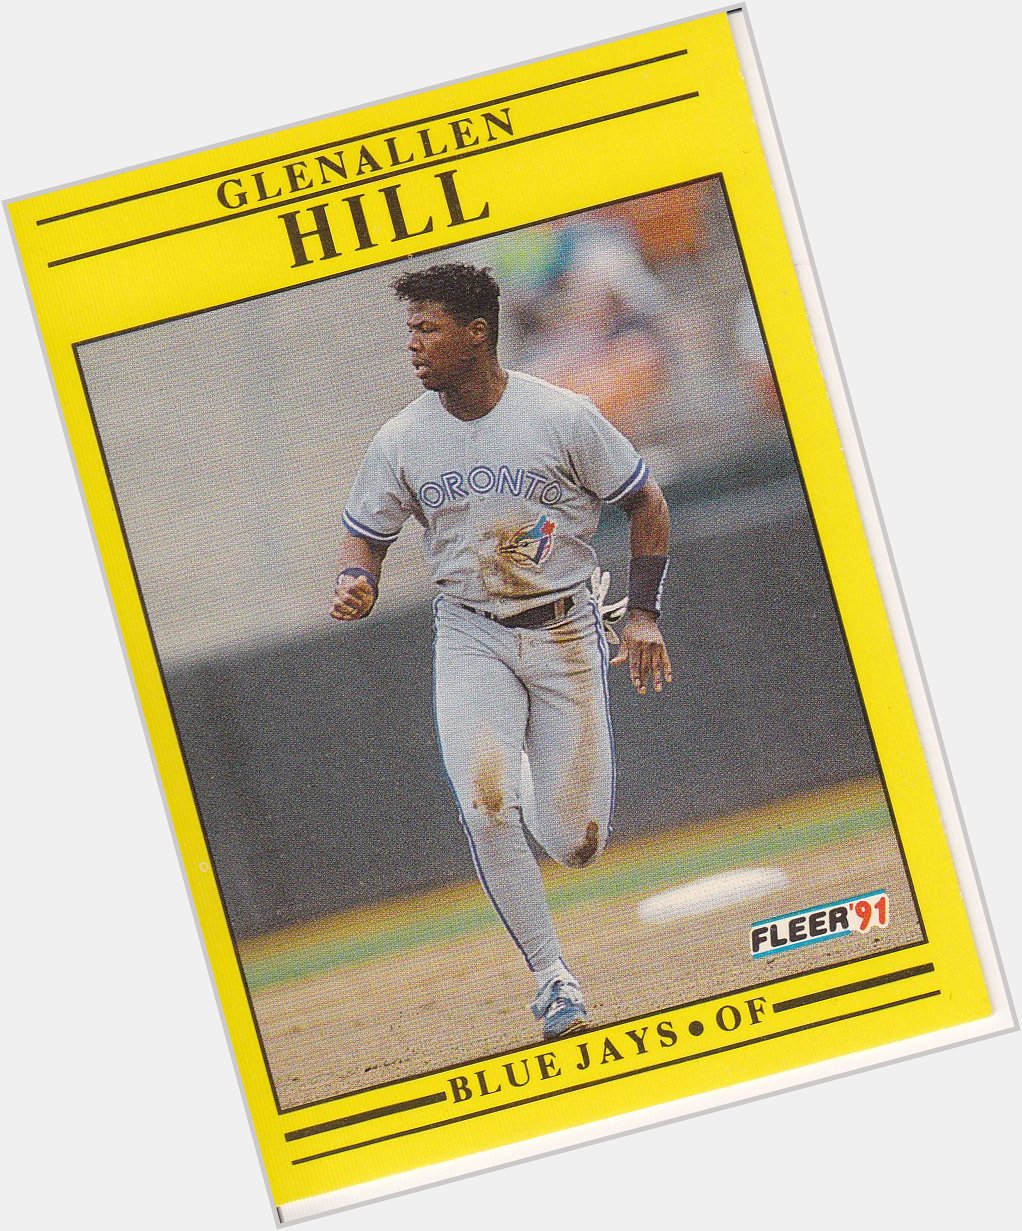 Happy 52nd Birthday to former Blue Jay Glenallen Hill!

May he not have any nightmares about spiders today. 